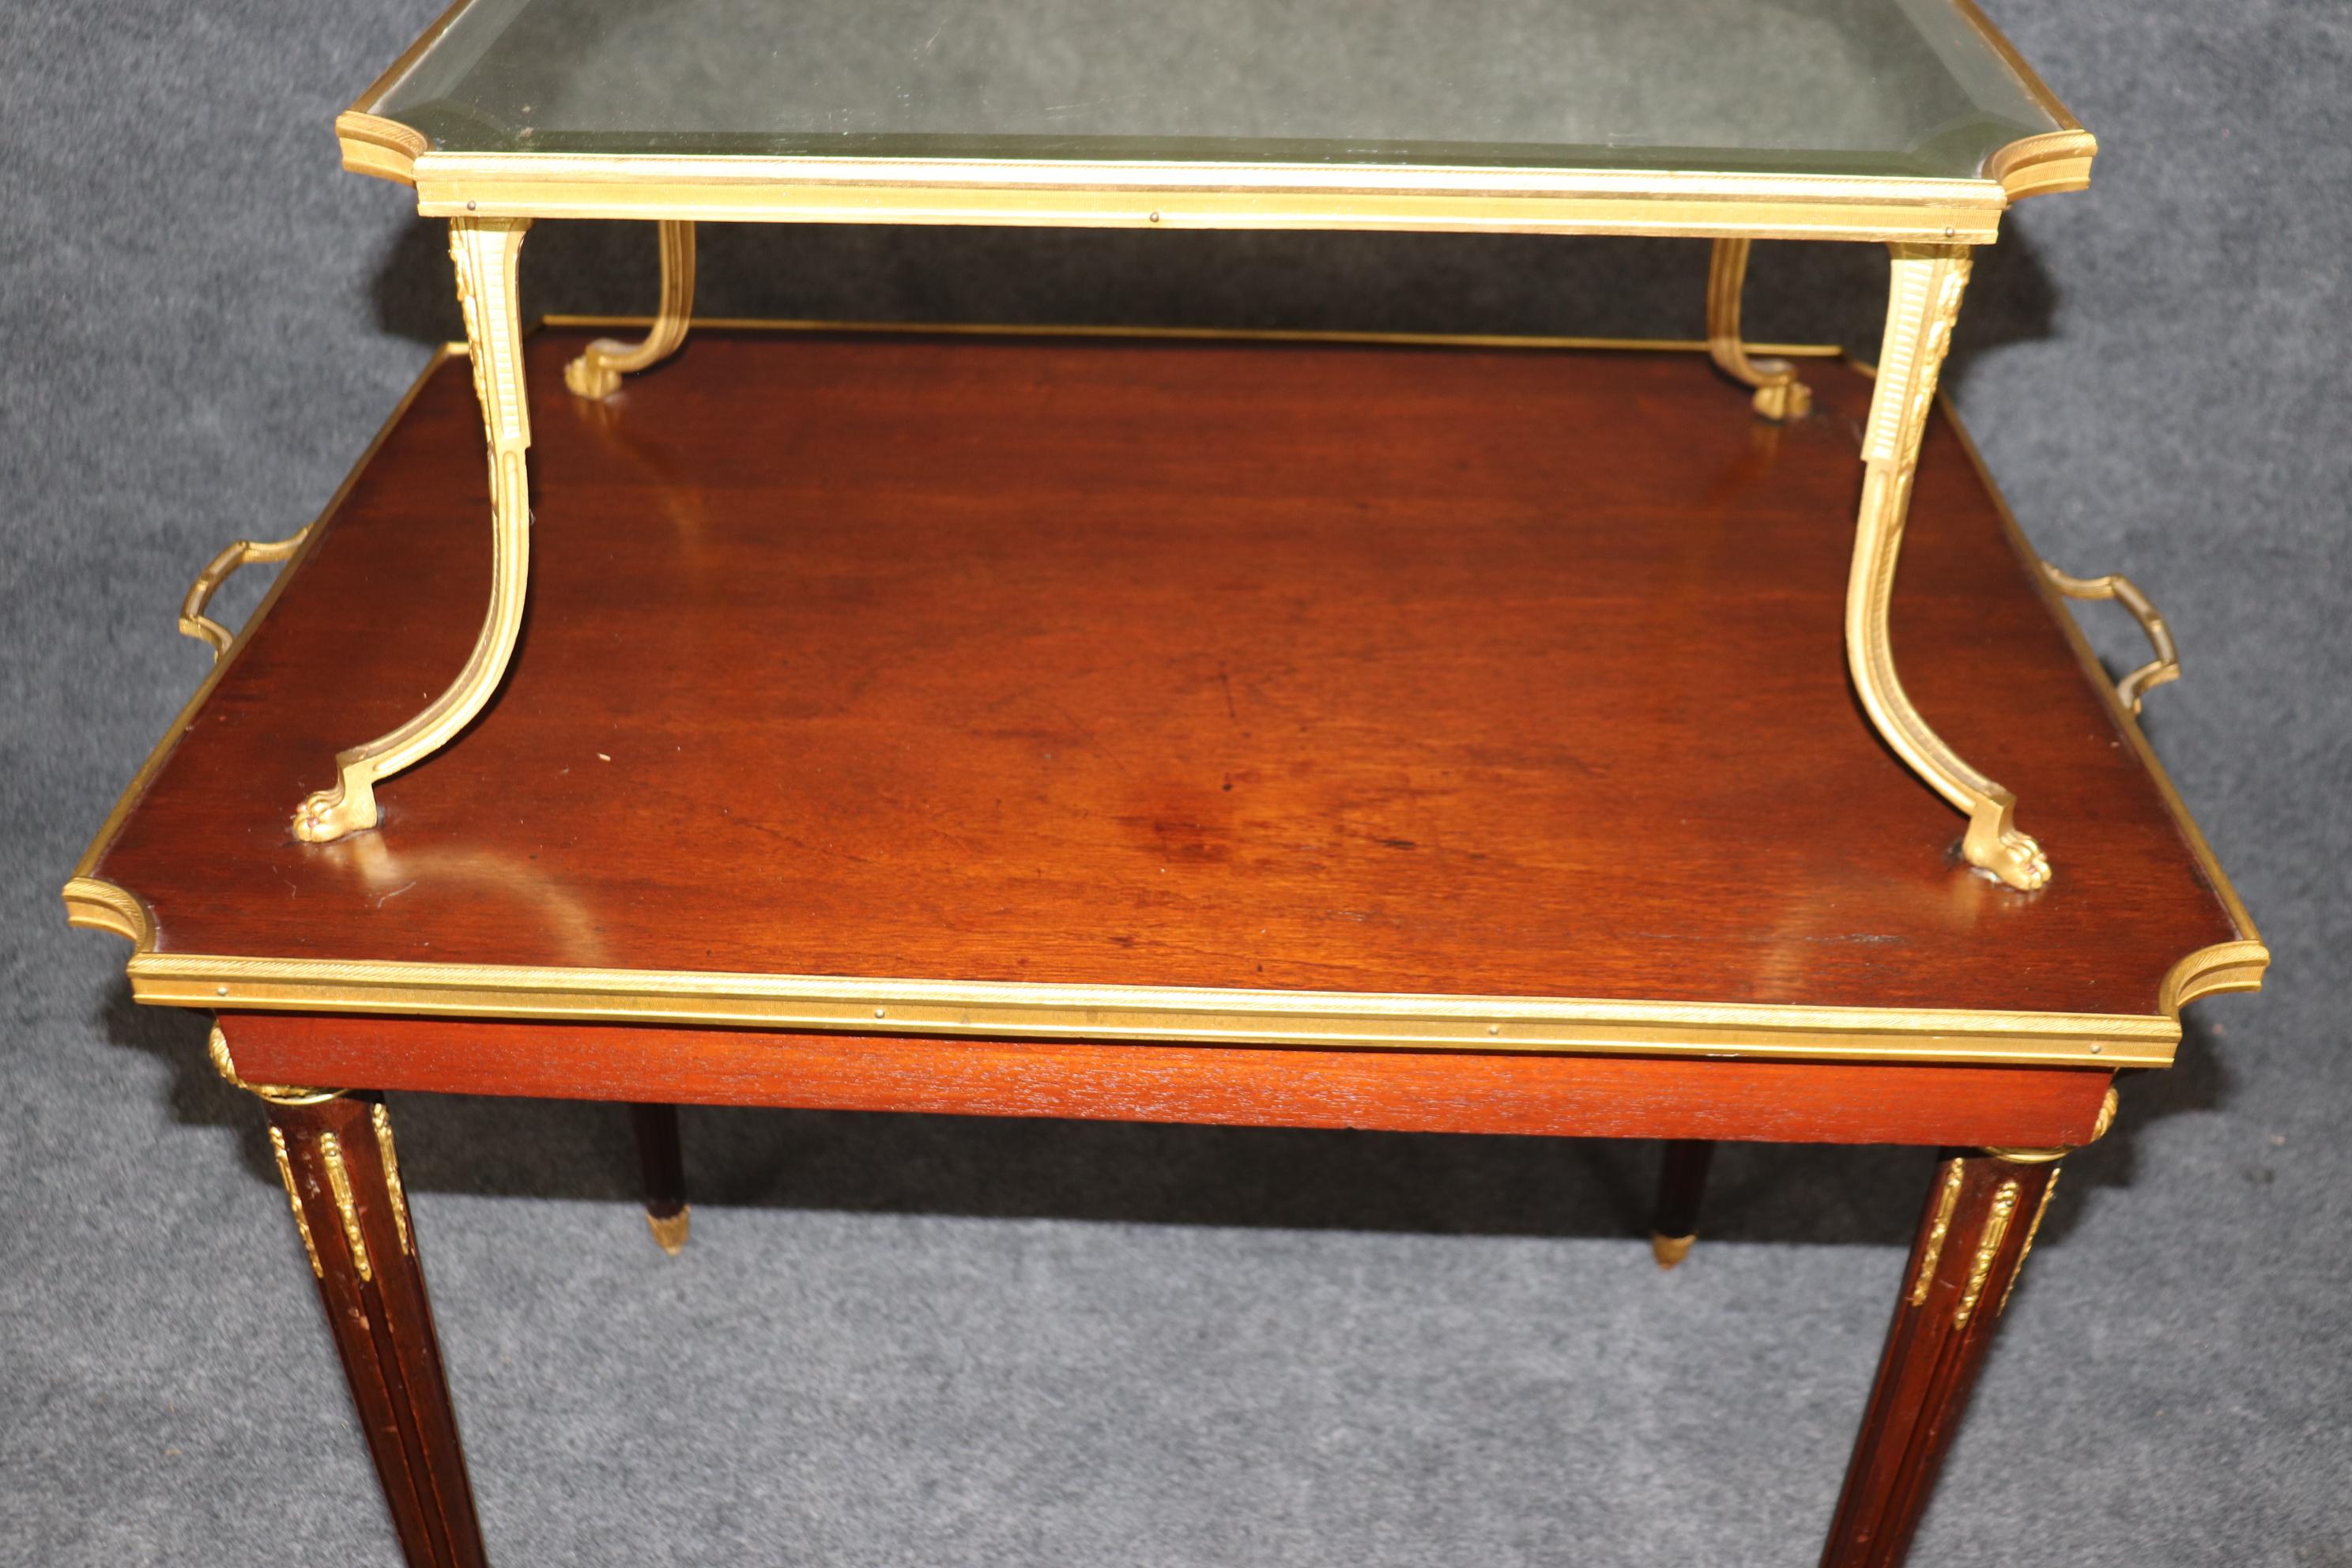 Fine Quality French Dore' Bronze and Mahogany Directoire Dessert Tray Top Table For Sale 7